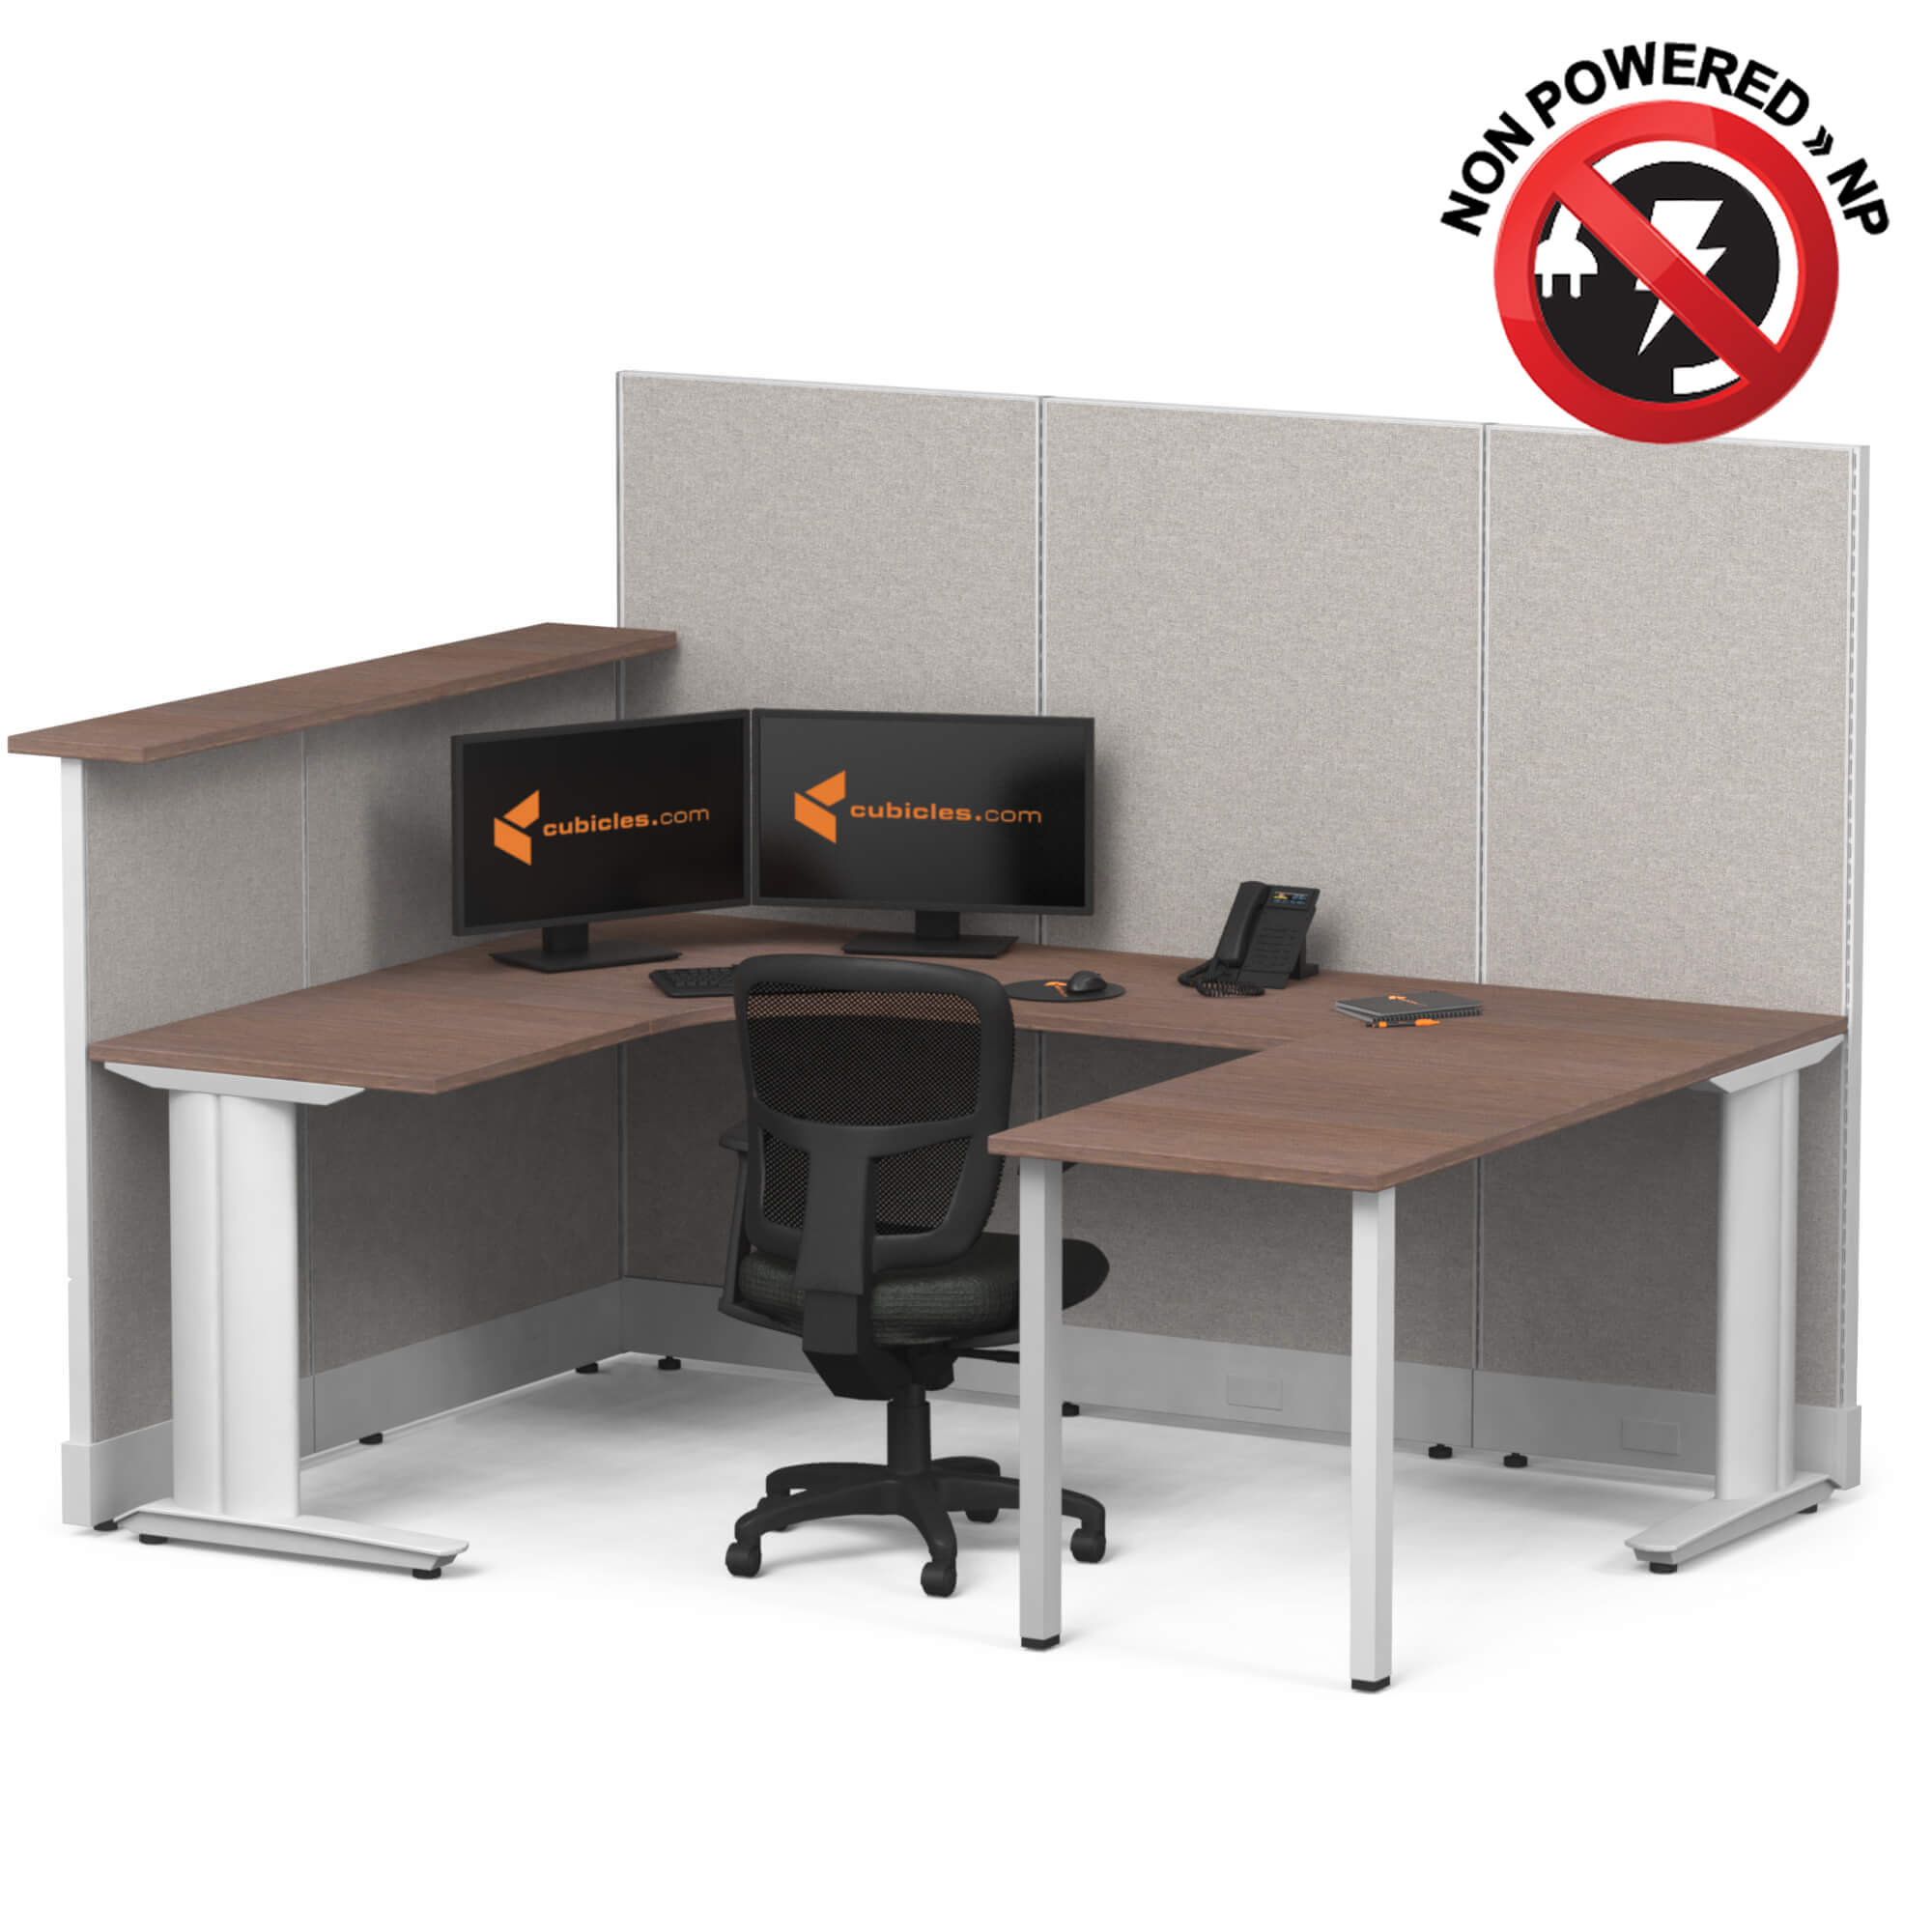 cubicle-desk-u-shaped-with-transaction-top-1pack-non-powered.jpg